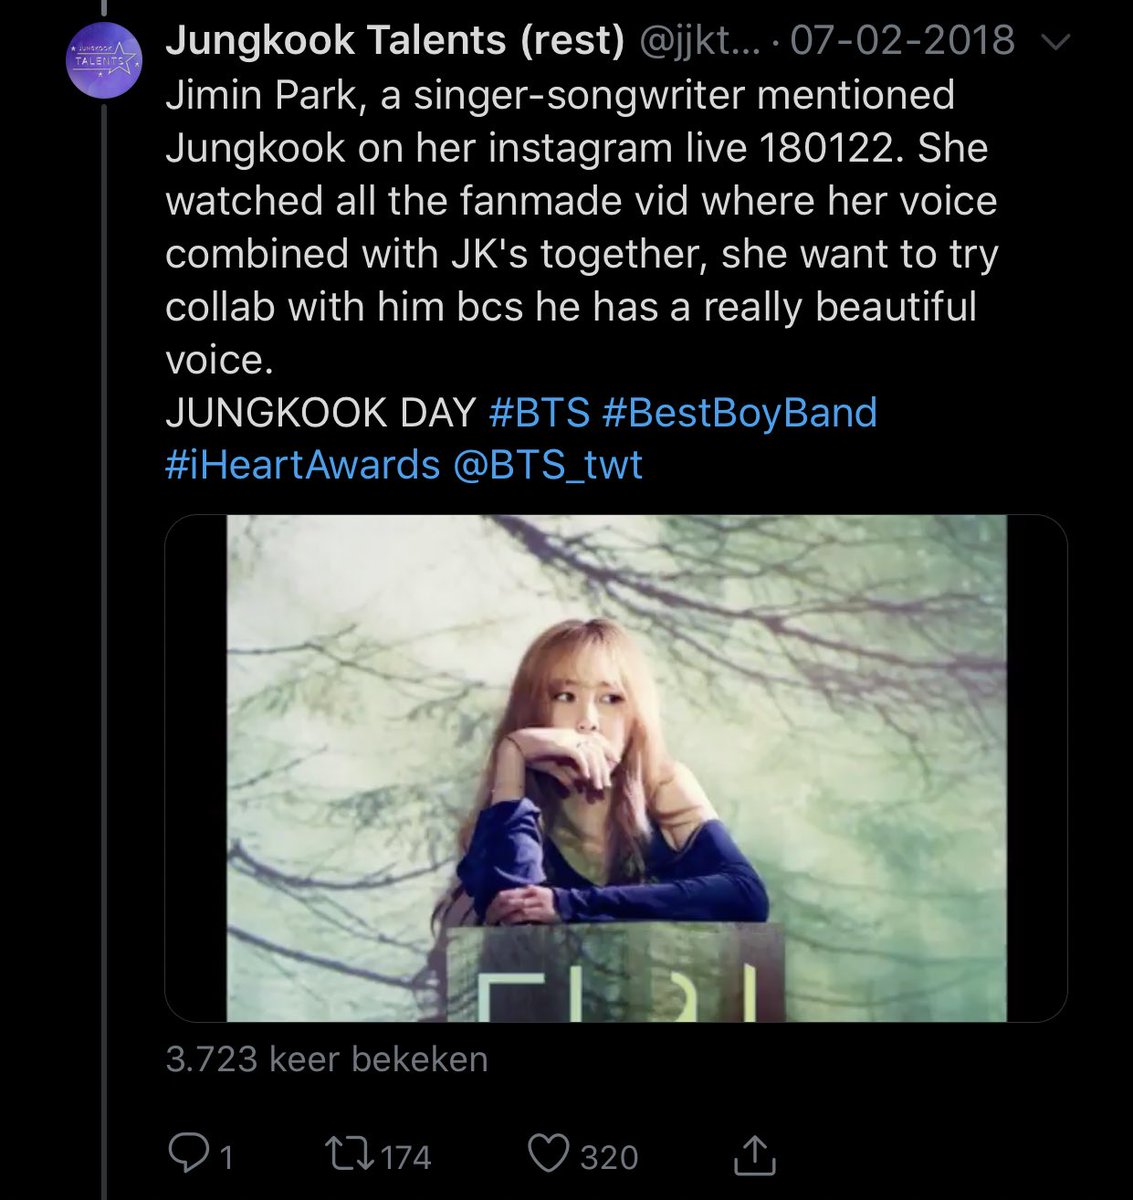 Even singer-songwriter Jimin Park, stated that she would loved to collaborate with Jungkook because of his beautiful voice. So much so that she even watched fan made videos where her voice was combined with Jungkook’s. As we can already tell Jungkook’s voice is highly praised.